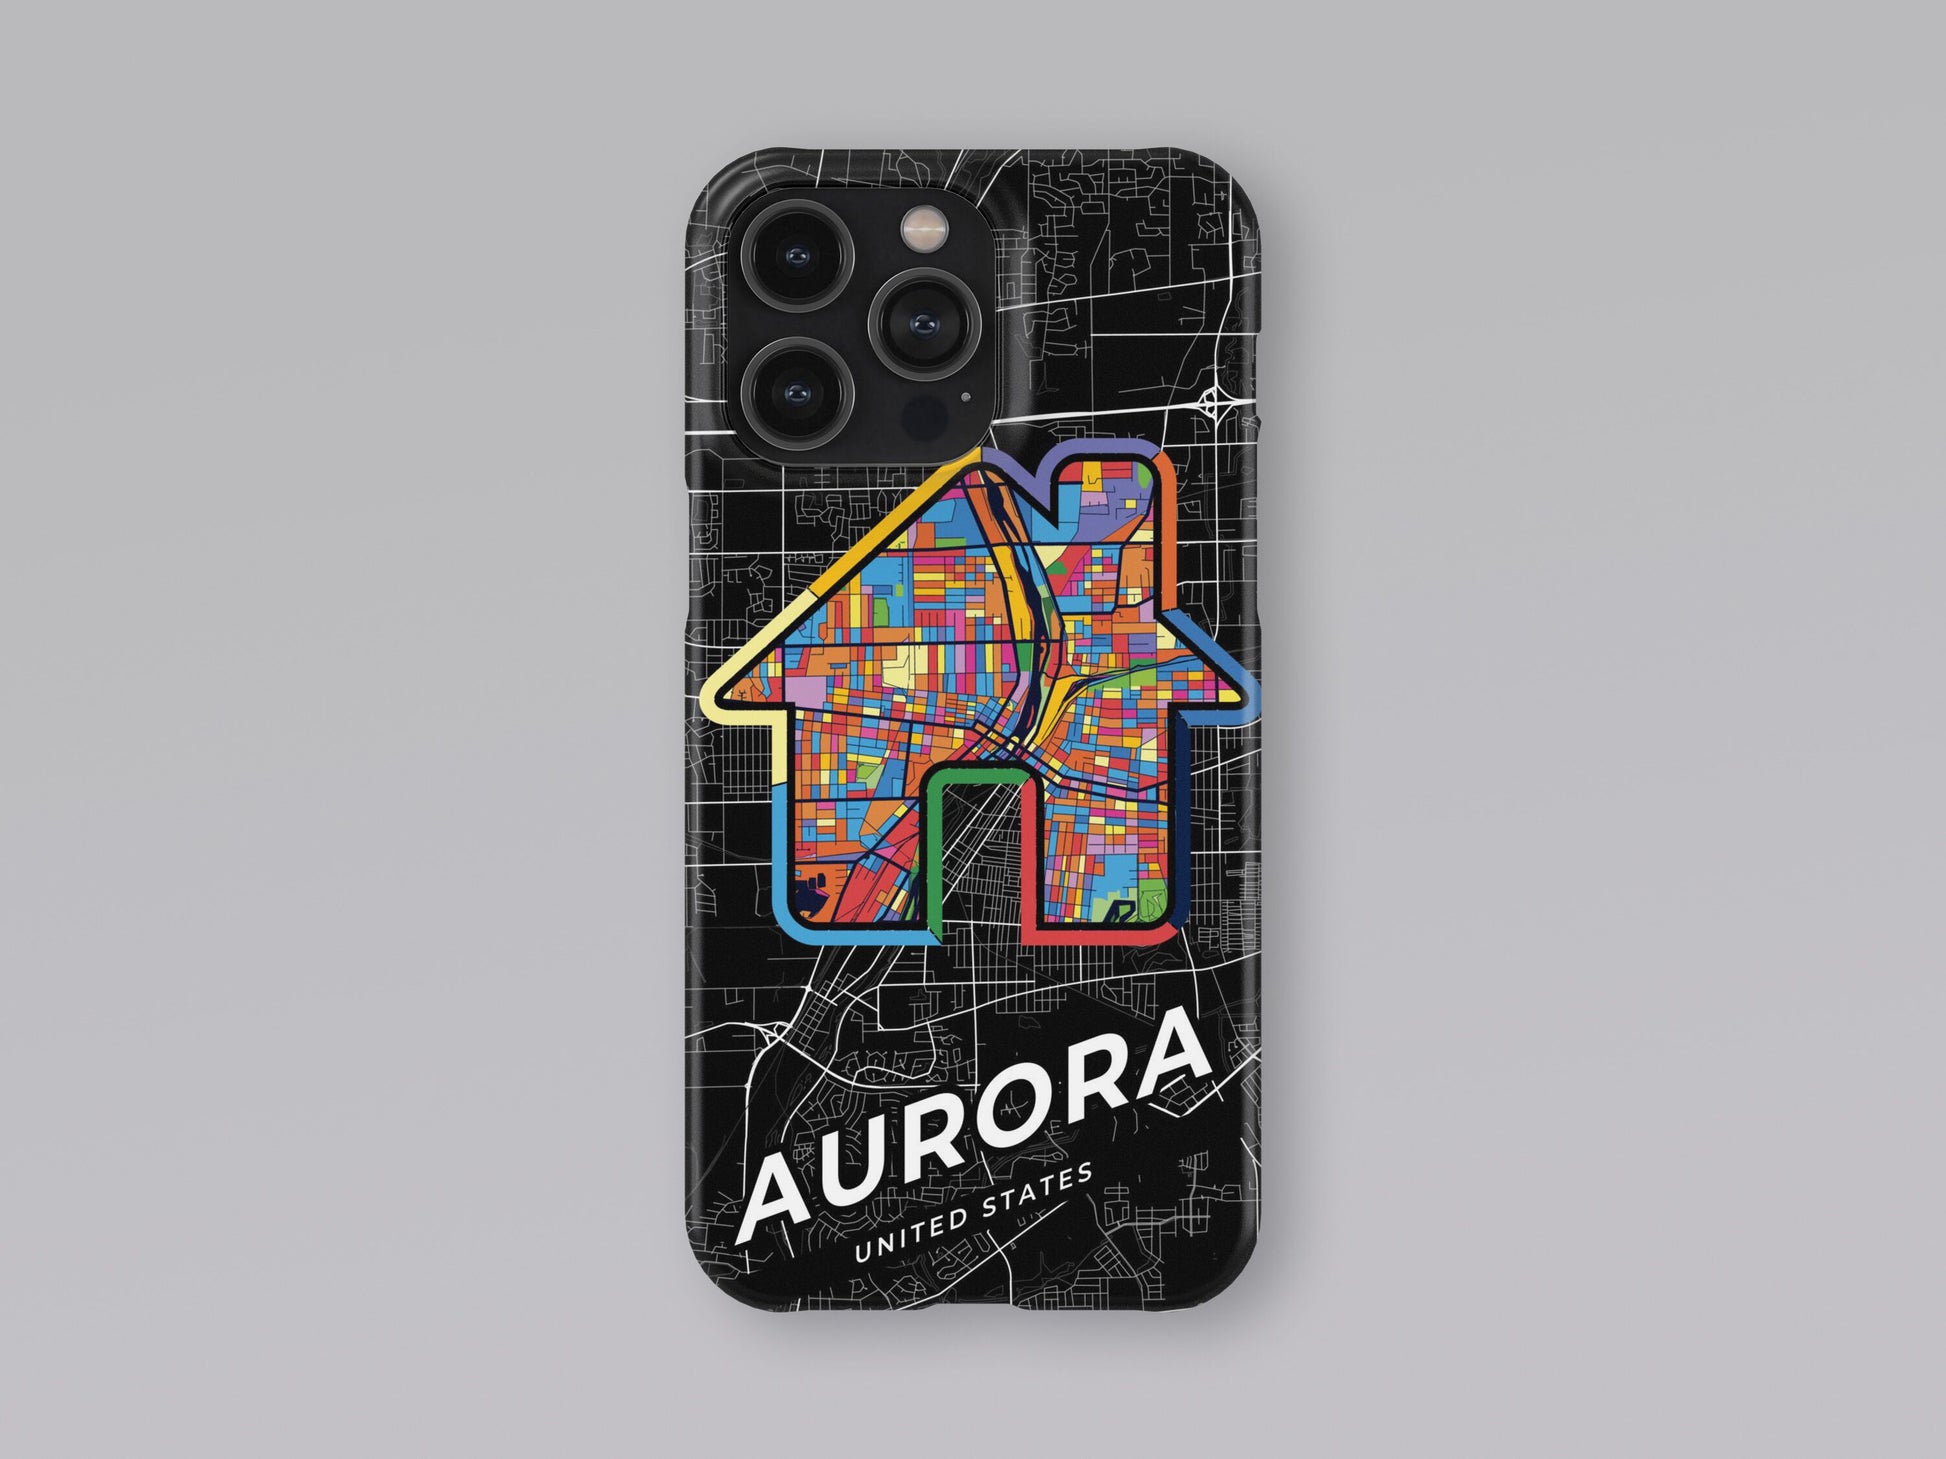 Aurora Illinois slim phone case with colorful icon. Birthday, wedding or housewarming gift. Couple match cases. 3